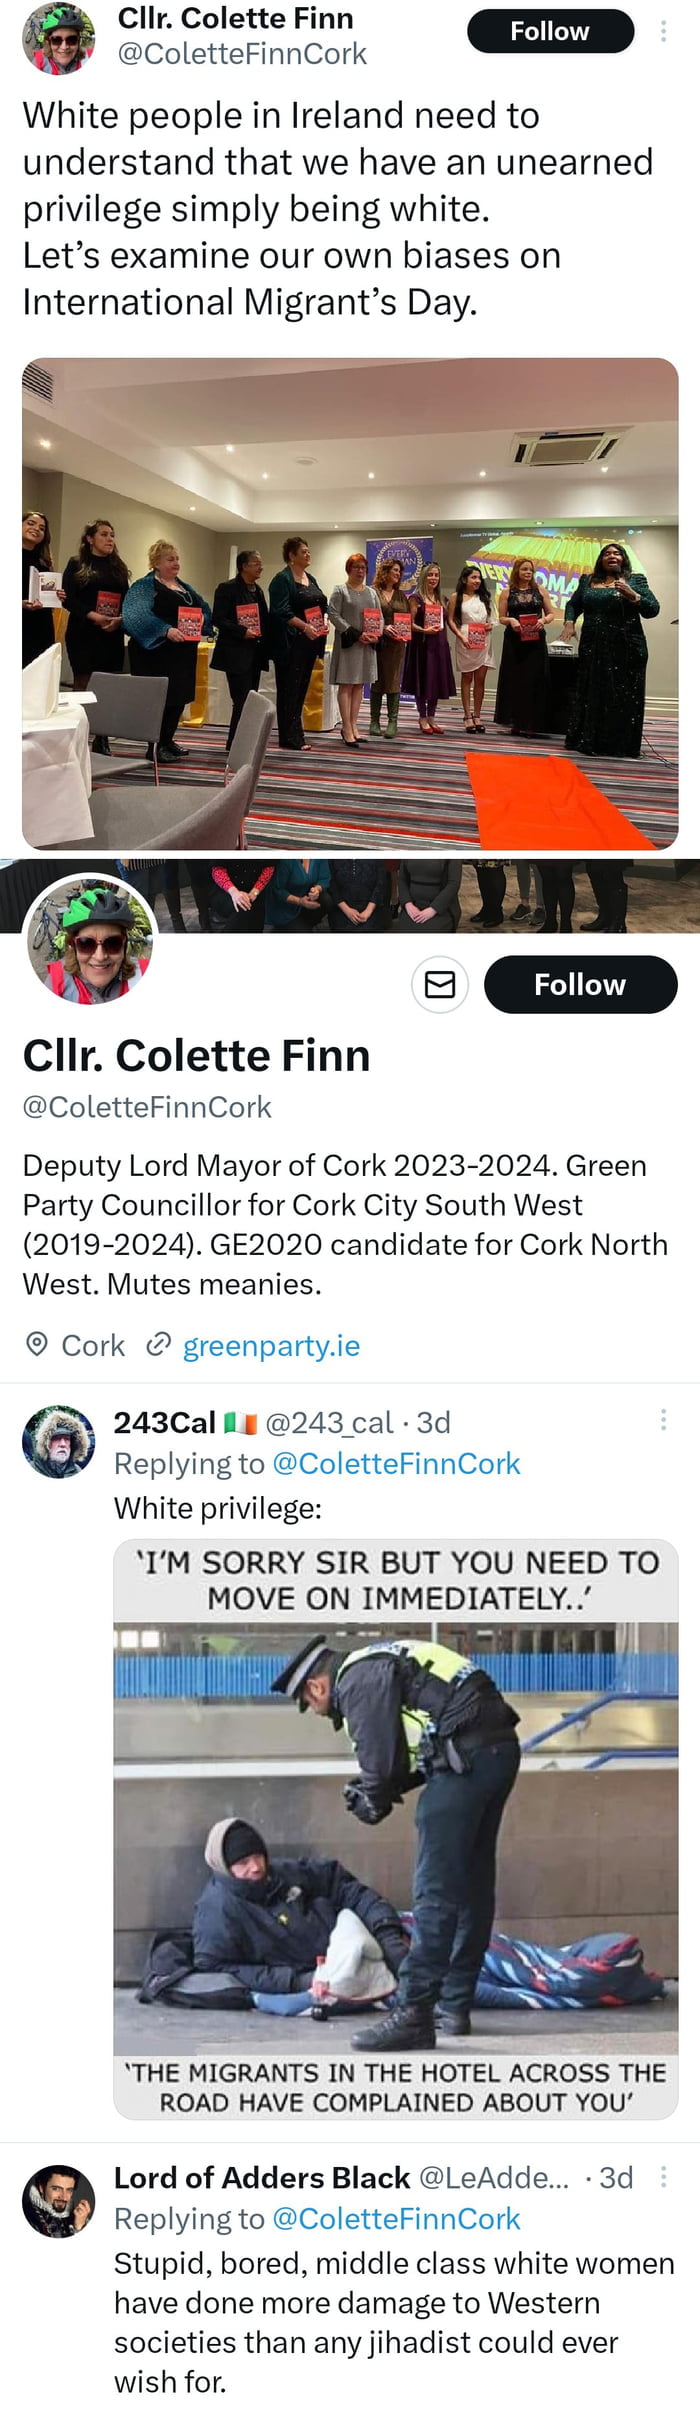 Yes, the Irish. The epitome of white privilege.